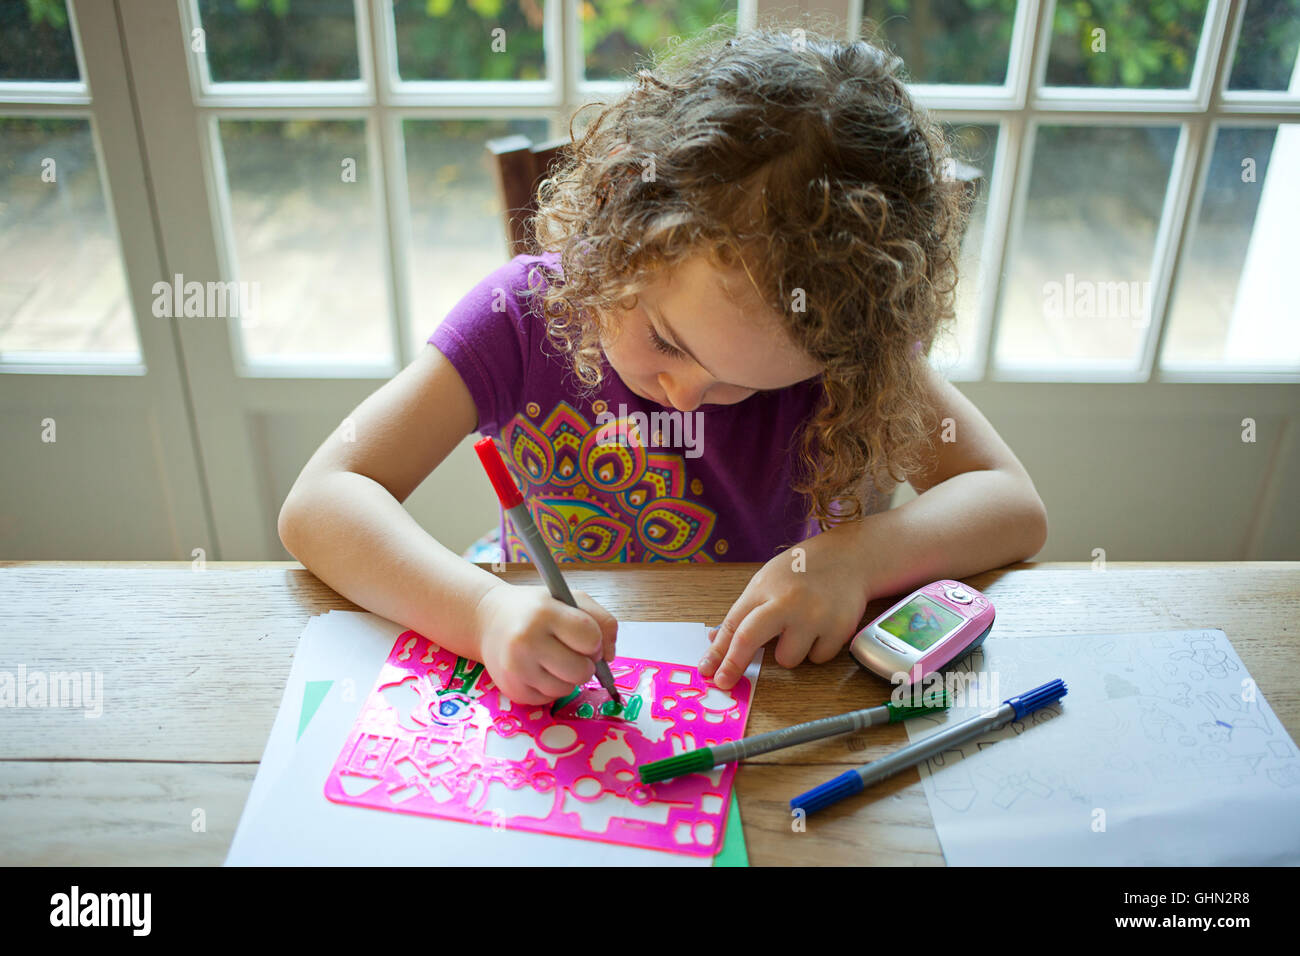 Young girl colouring in at a desk Stock Photo